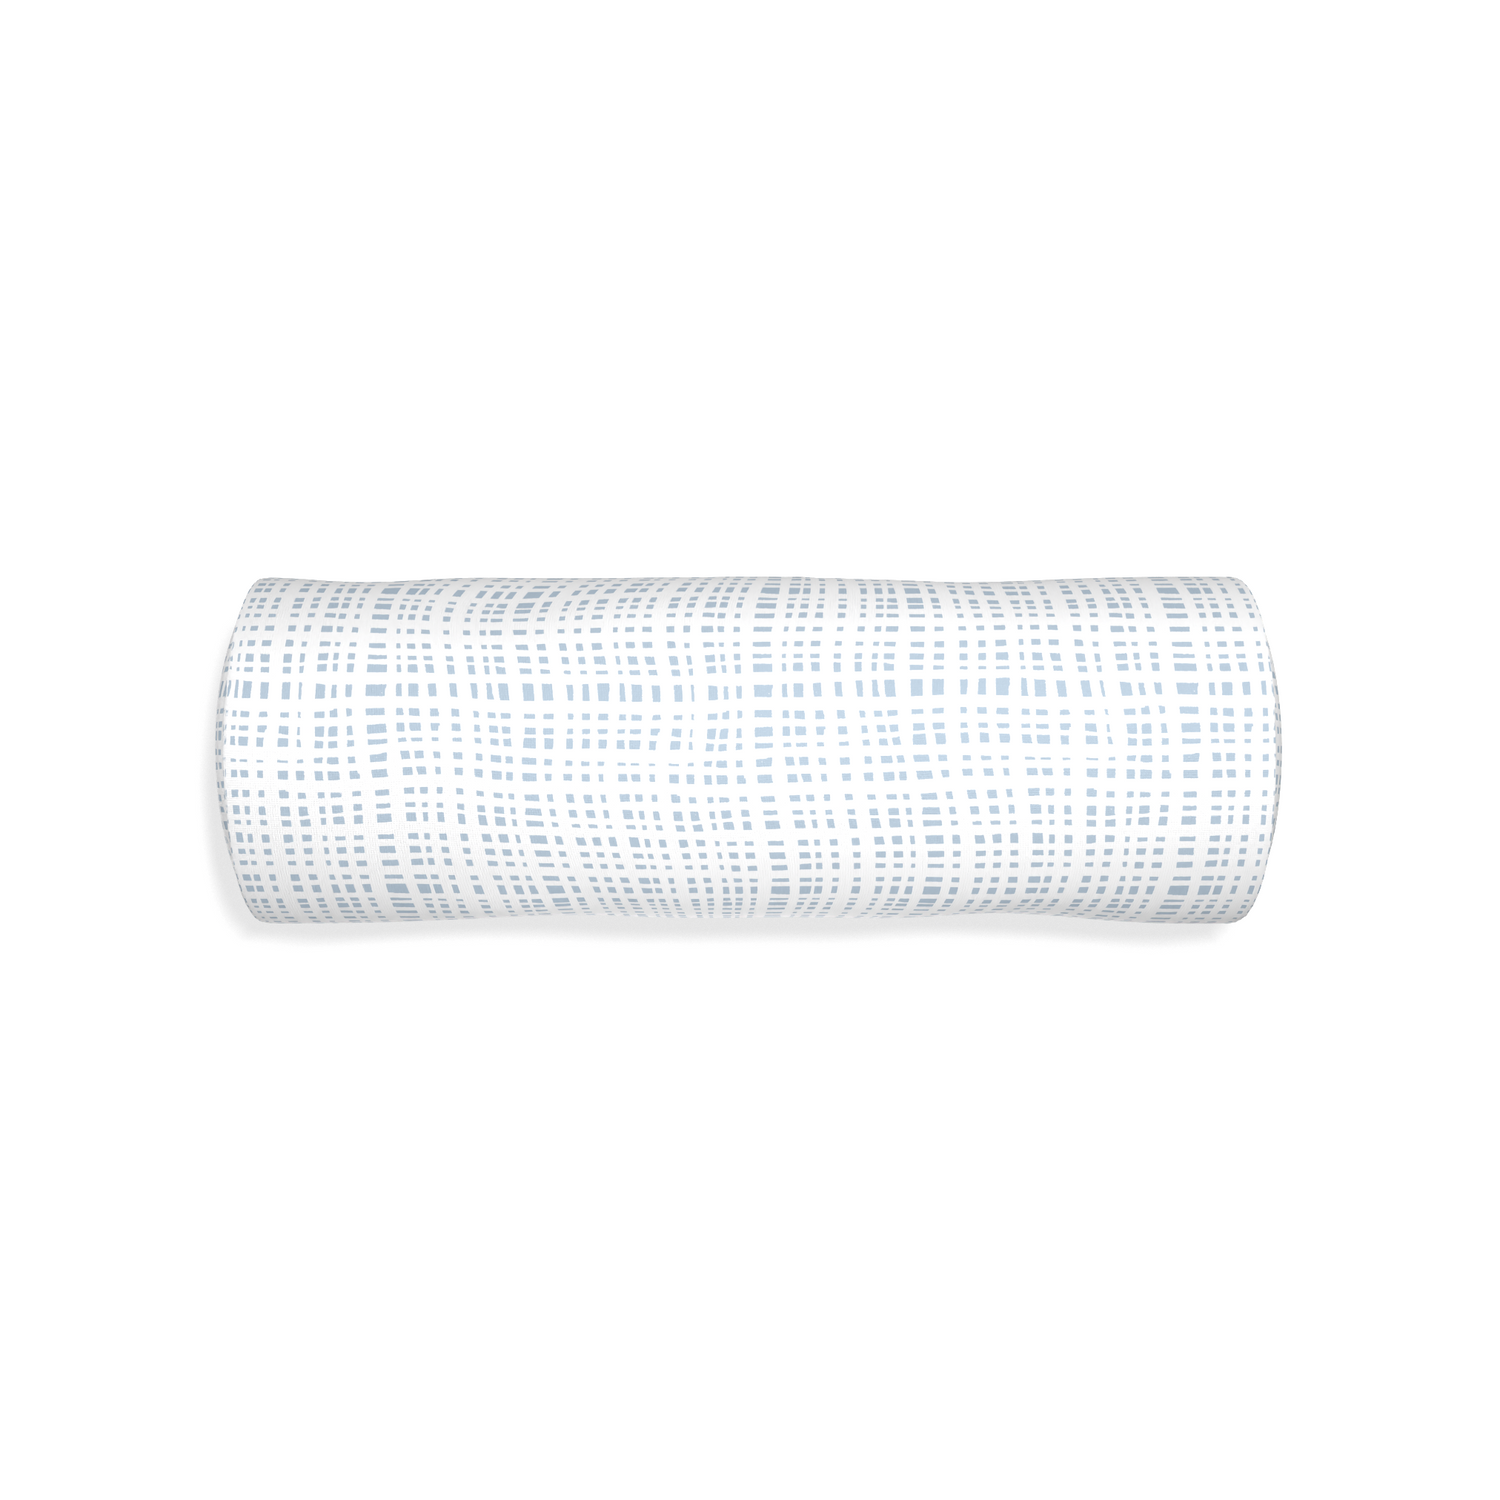 Bolster ginger sky custom plaid sky bluepillow with none on white background